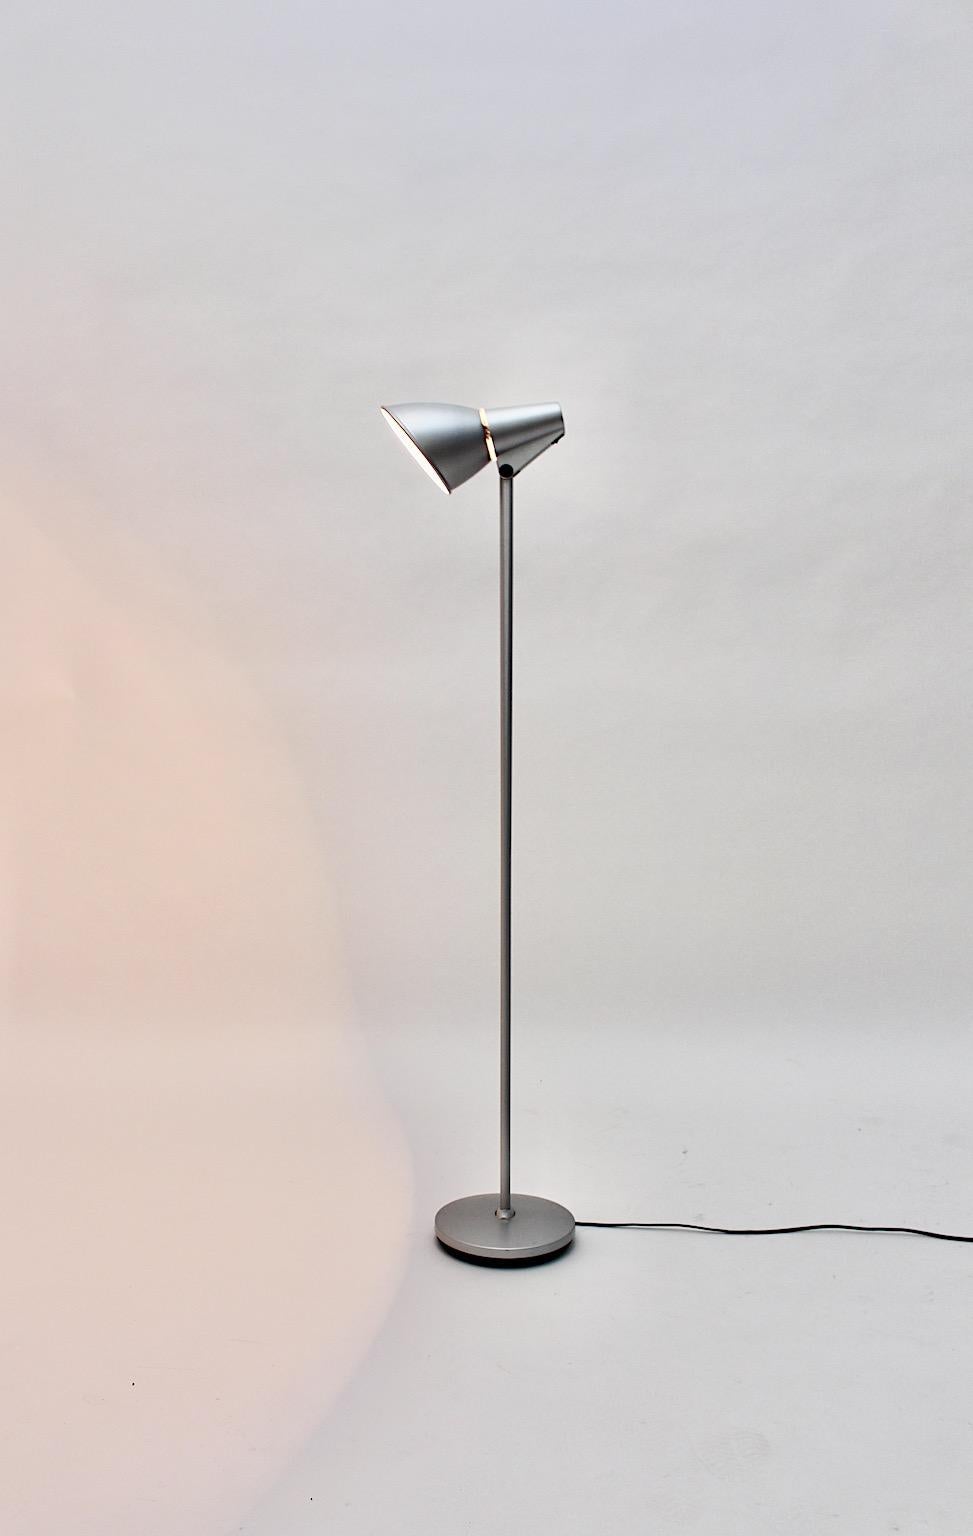 Modern vintage floor lamp from liver metal model spy designed by Hannes Wettstein for Artemide 1996, Italy.
An amazing floor lamp designed by Hannes Wettstein model Spy 
for Artemide Pregagnana Milanese Italy from silver lacquered aluminum and